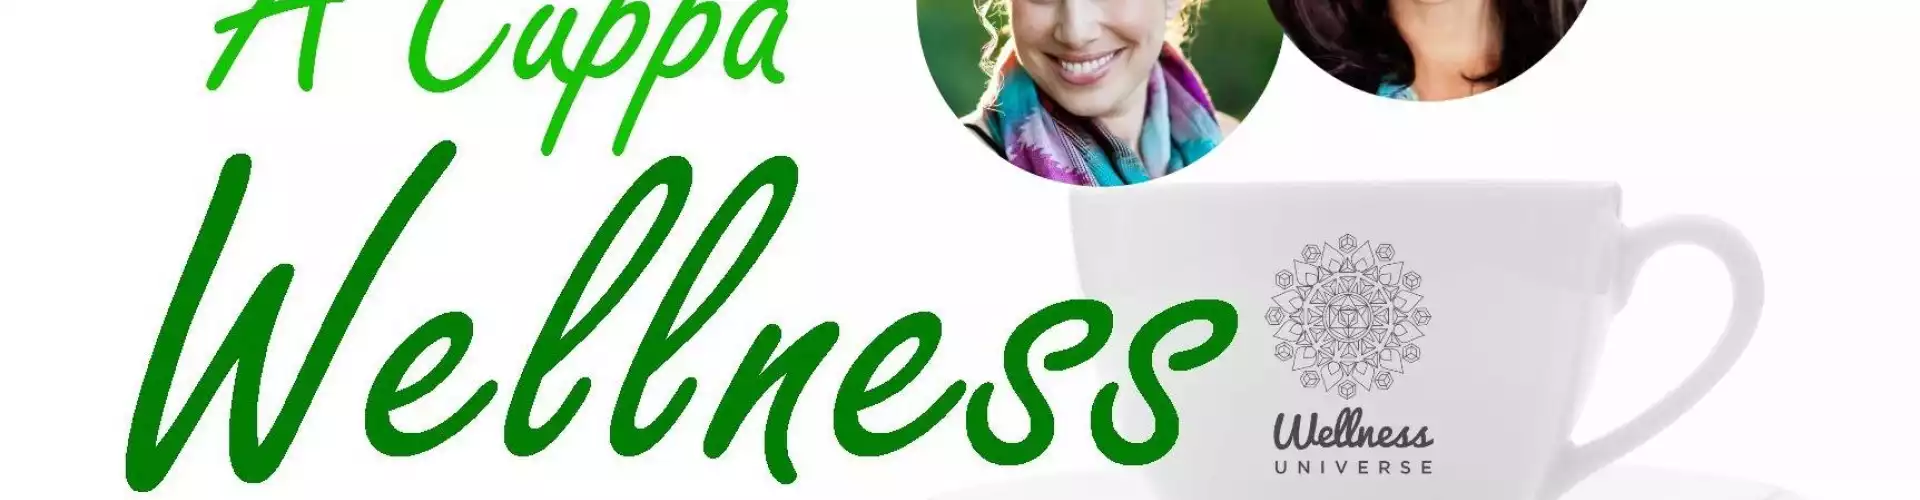 A Cuppa Wellness with Julie Reisler - The Easy Life Makeover - 3 Secrets to Design Your Best You